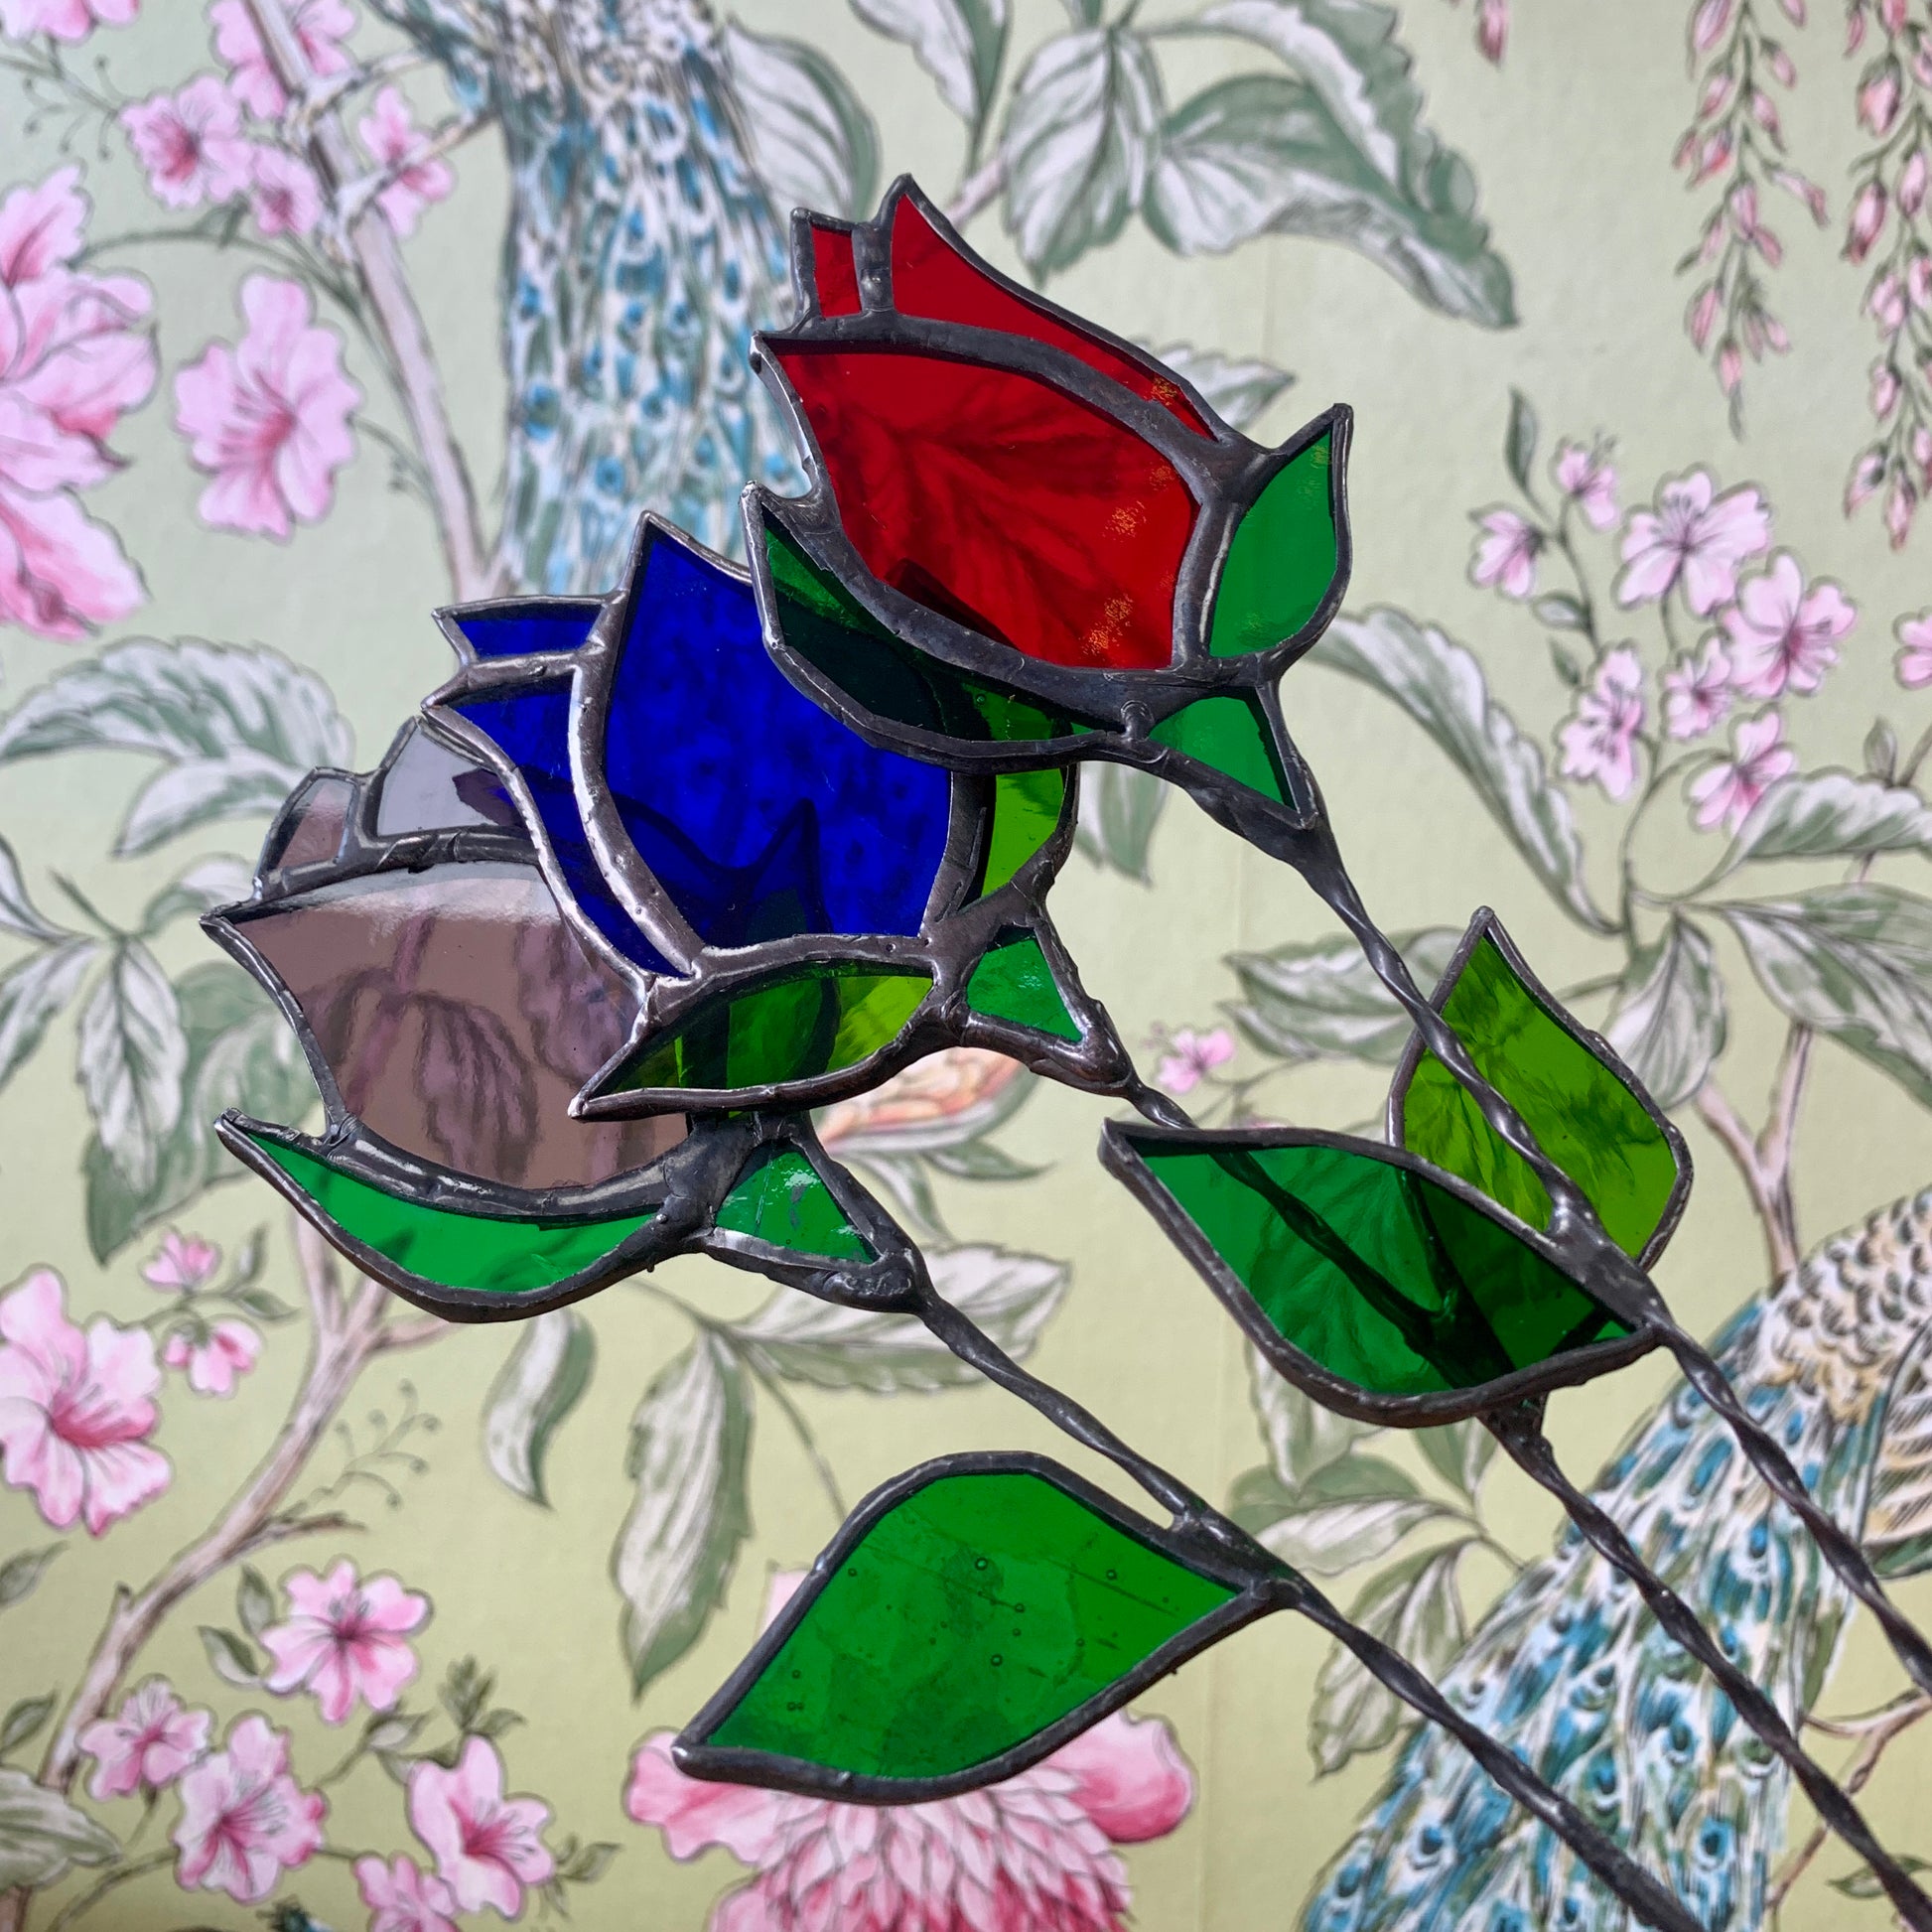 A stained glass rose bud on a copperwire stem.